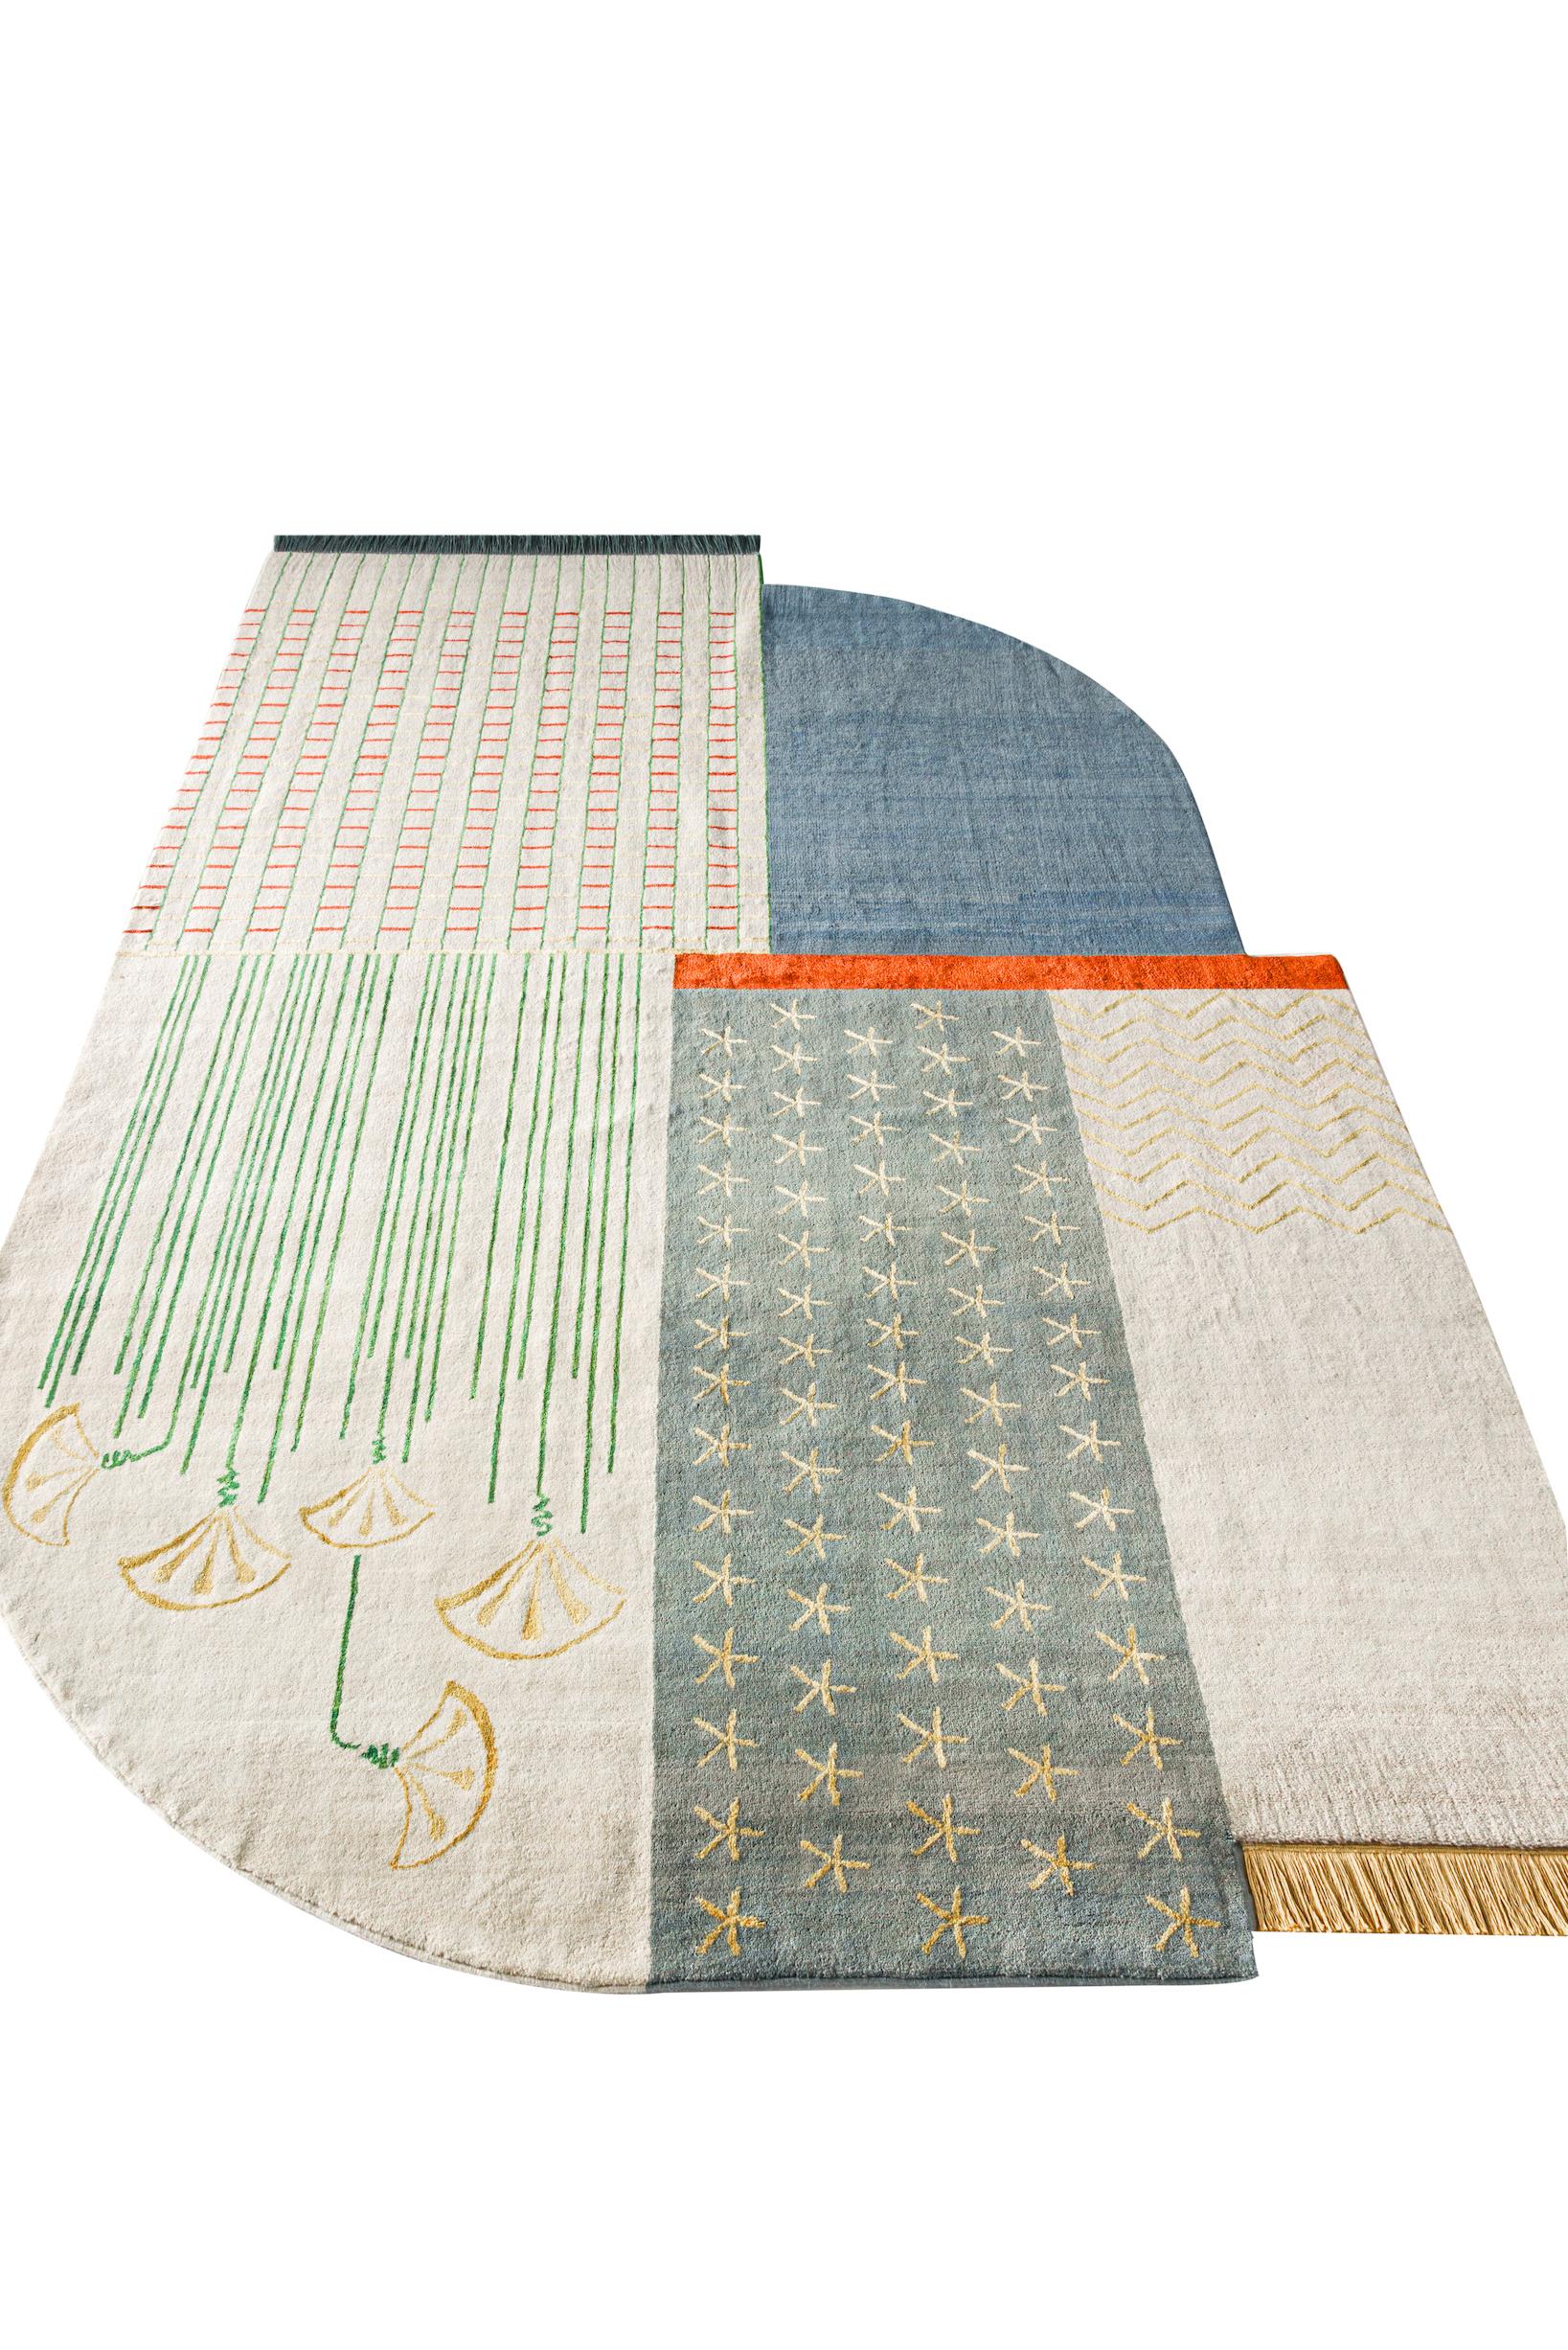 Hand-Knotted Wool & Silk Cut-Out Rug with Modernized Ancient Egyptian Design For Sale 3